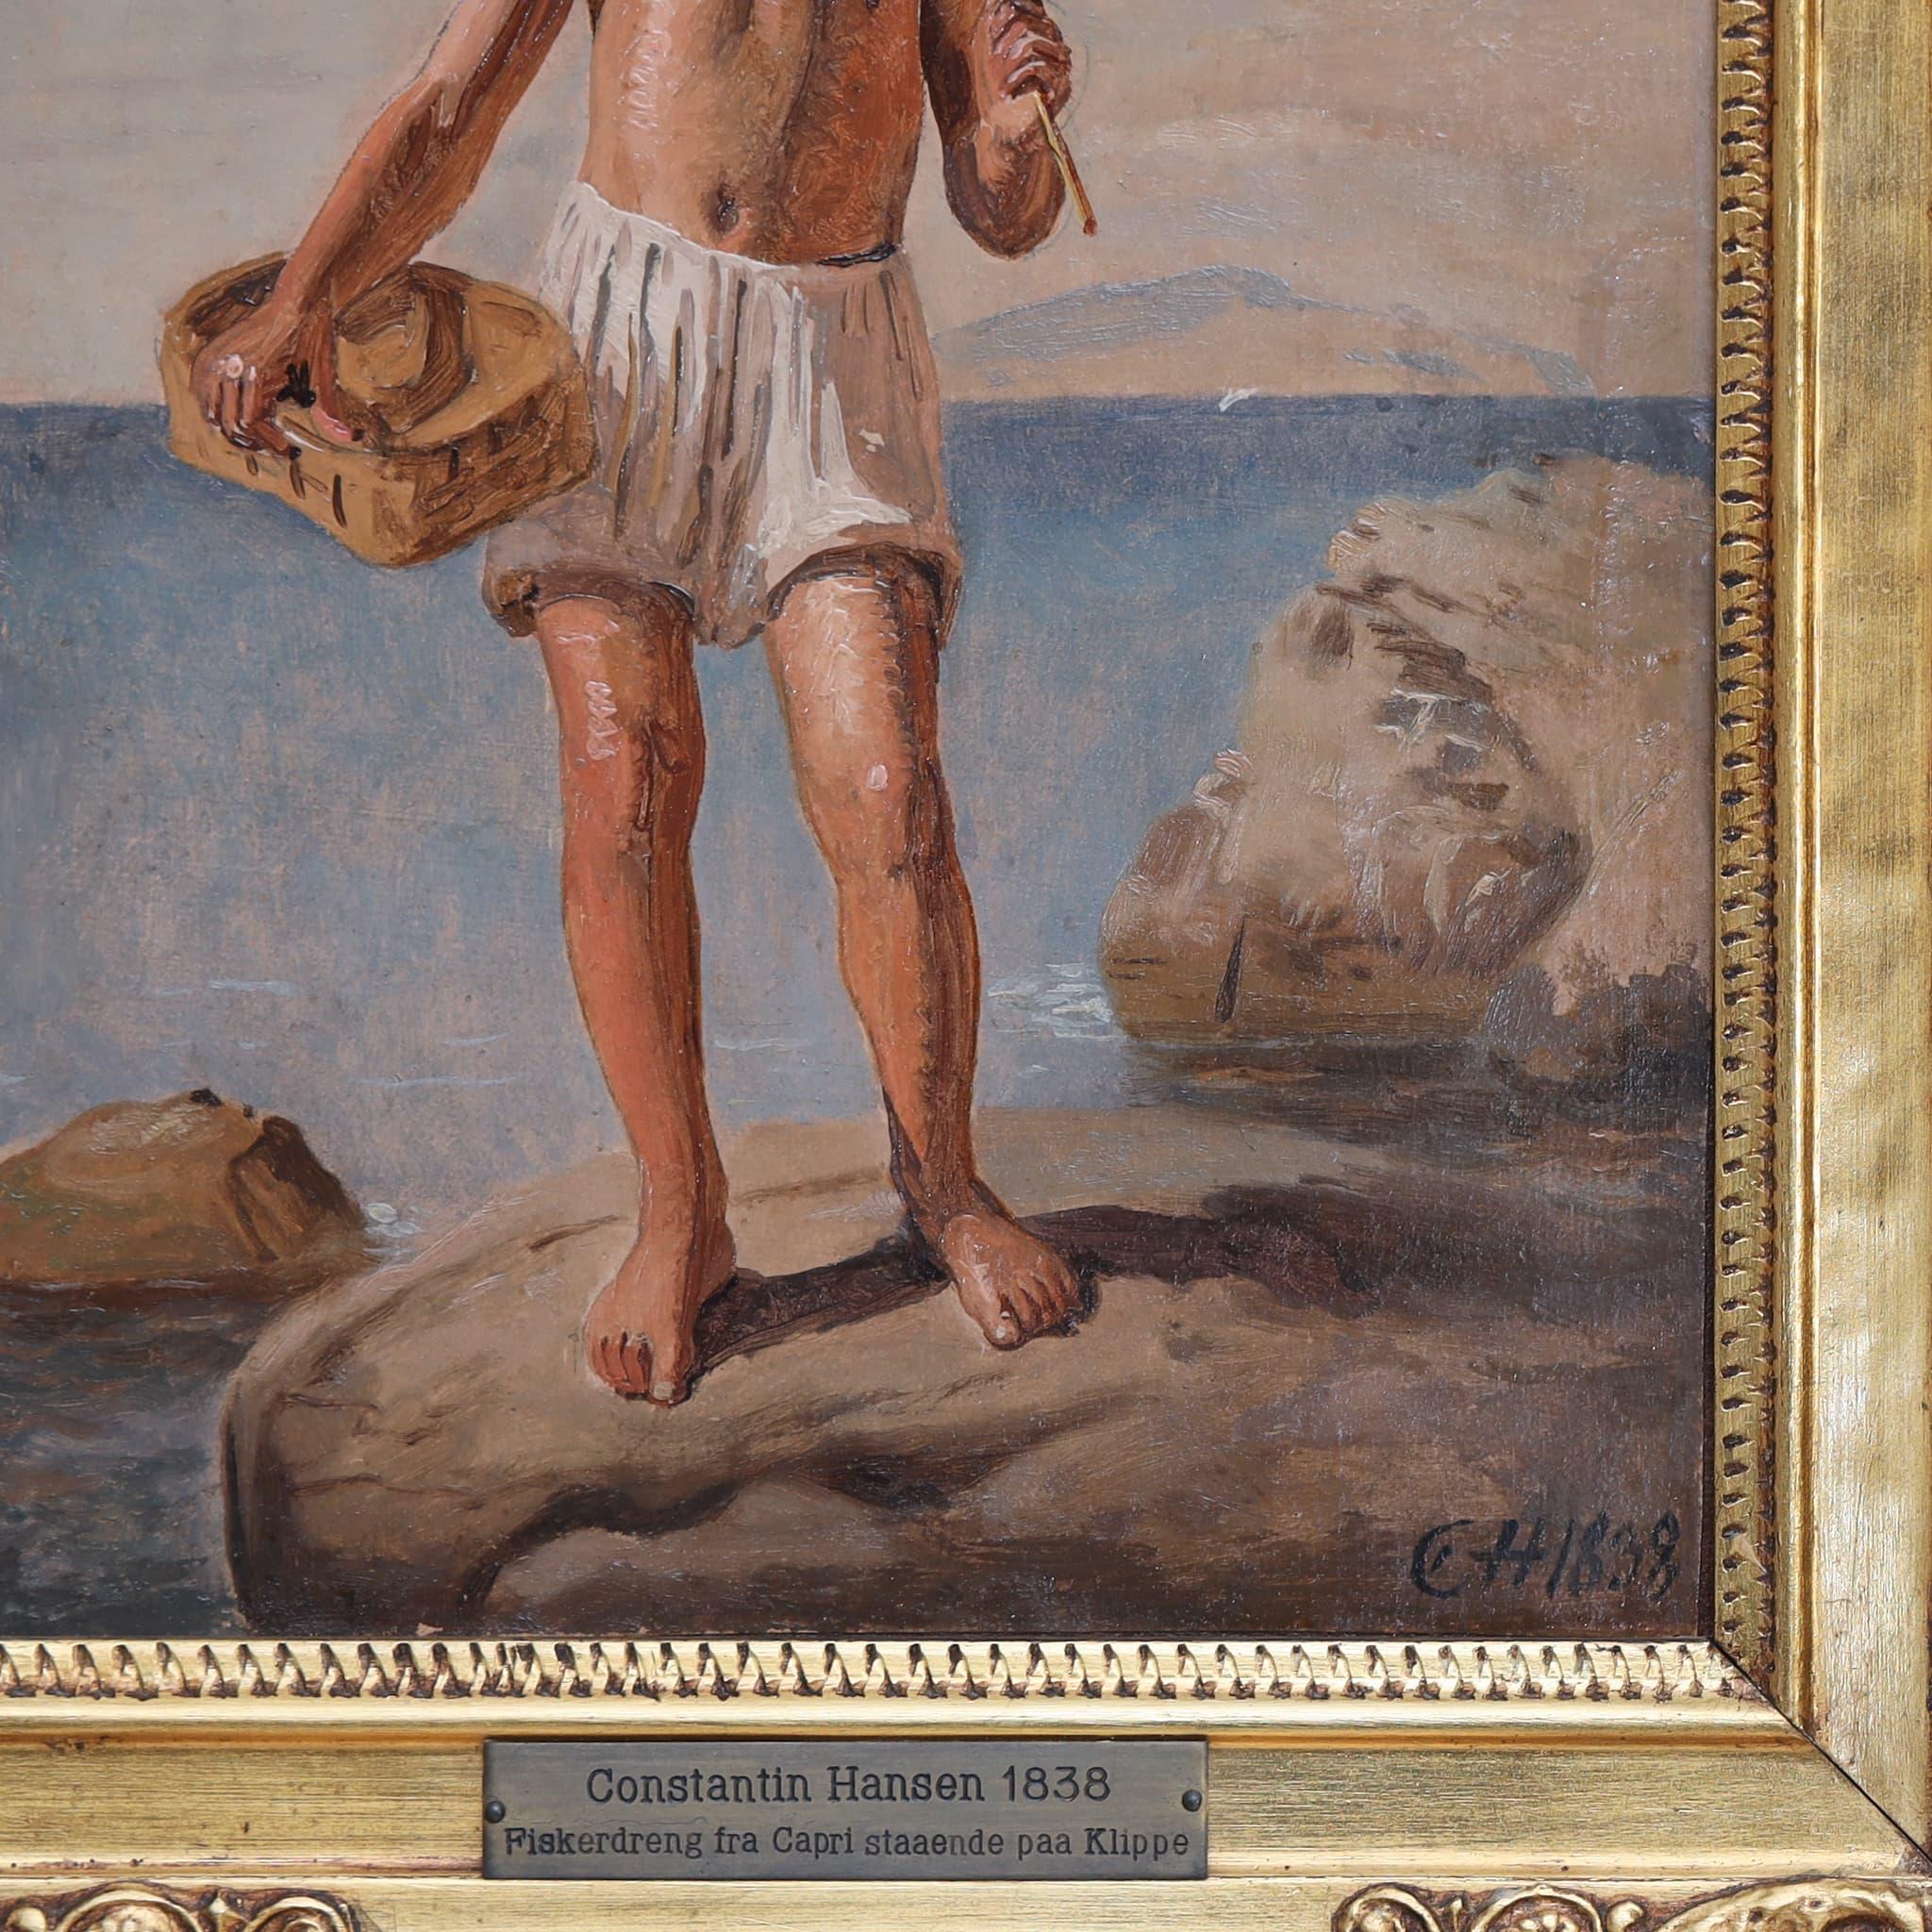 Painting in Oil on Canvas, depicting a young fisher boy in swimming trunks, shouldering his fishing rod and holding a basket in his other hand. This wonderful small painting can be considered a study for Hansen's main artwork, called 